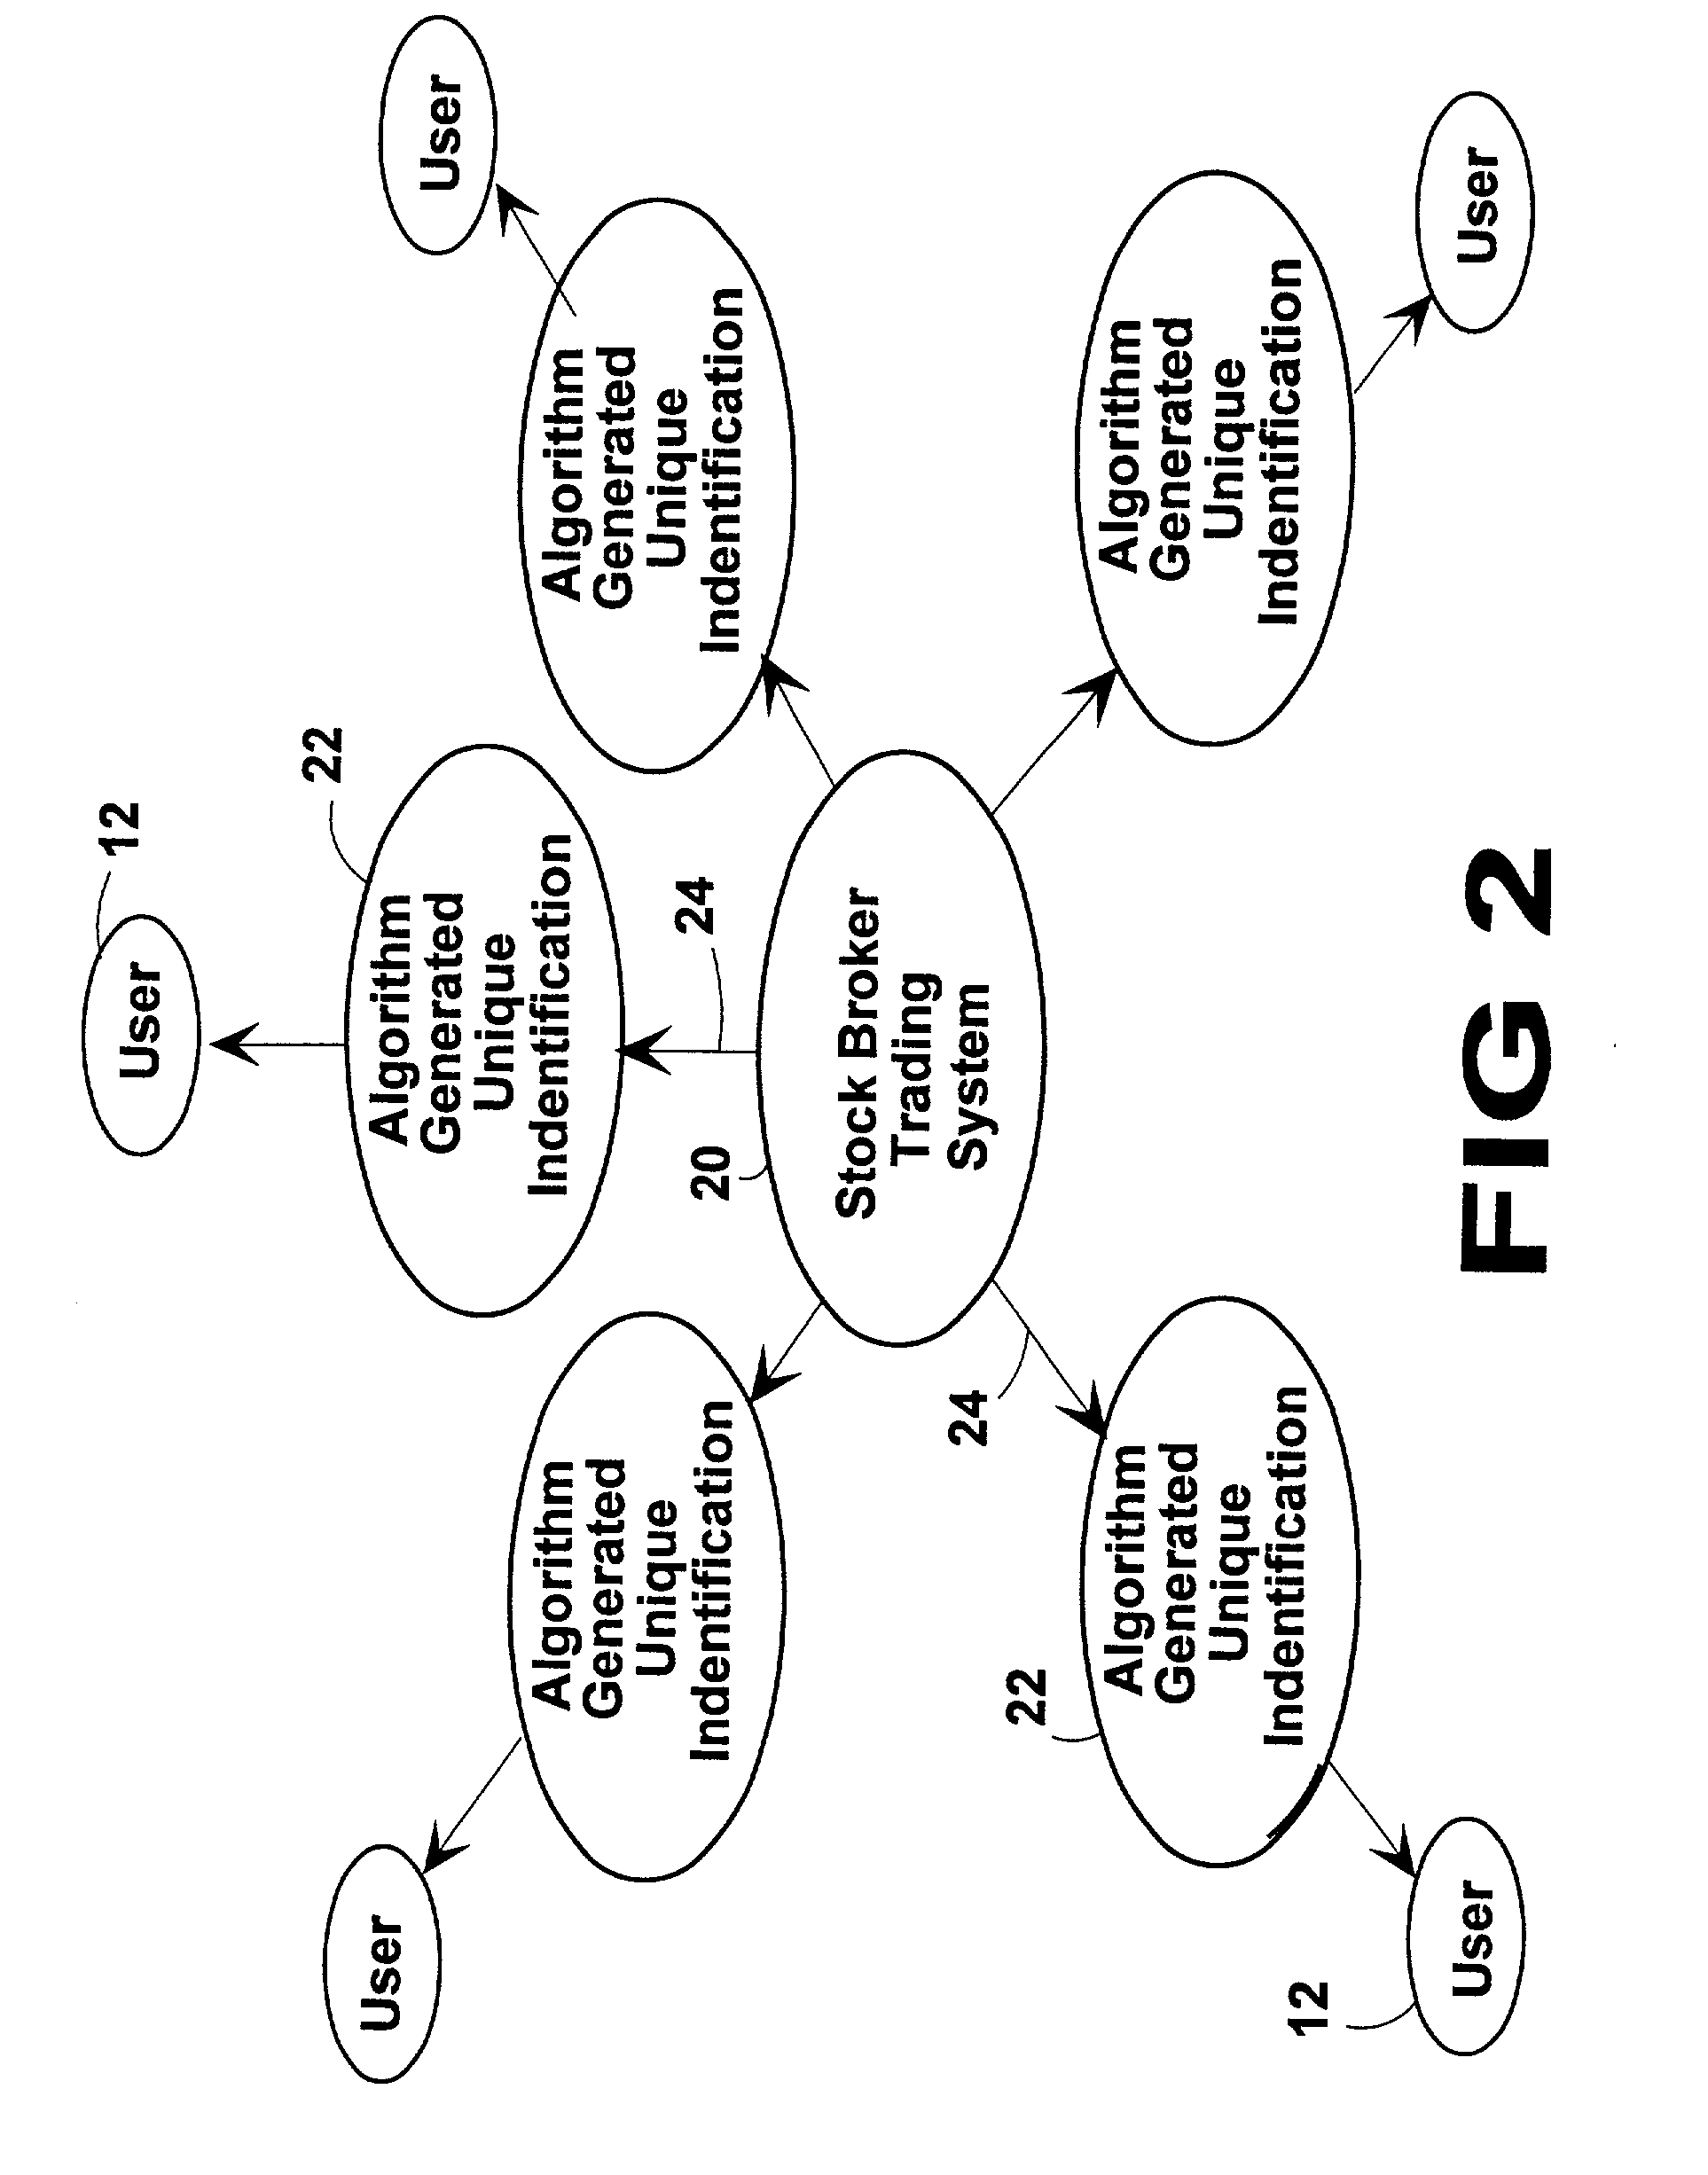 Hypertext transfer protocol application programming interface between client-side trading systems and server-side stock trading systems